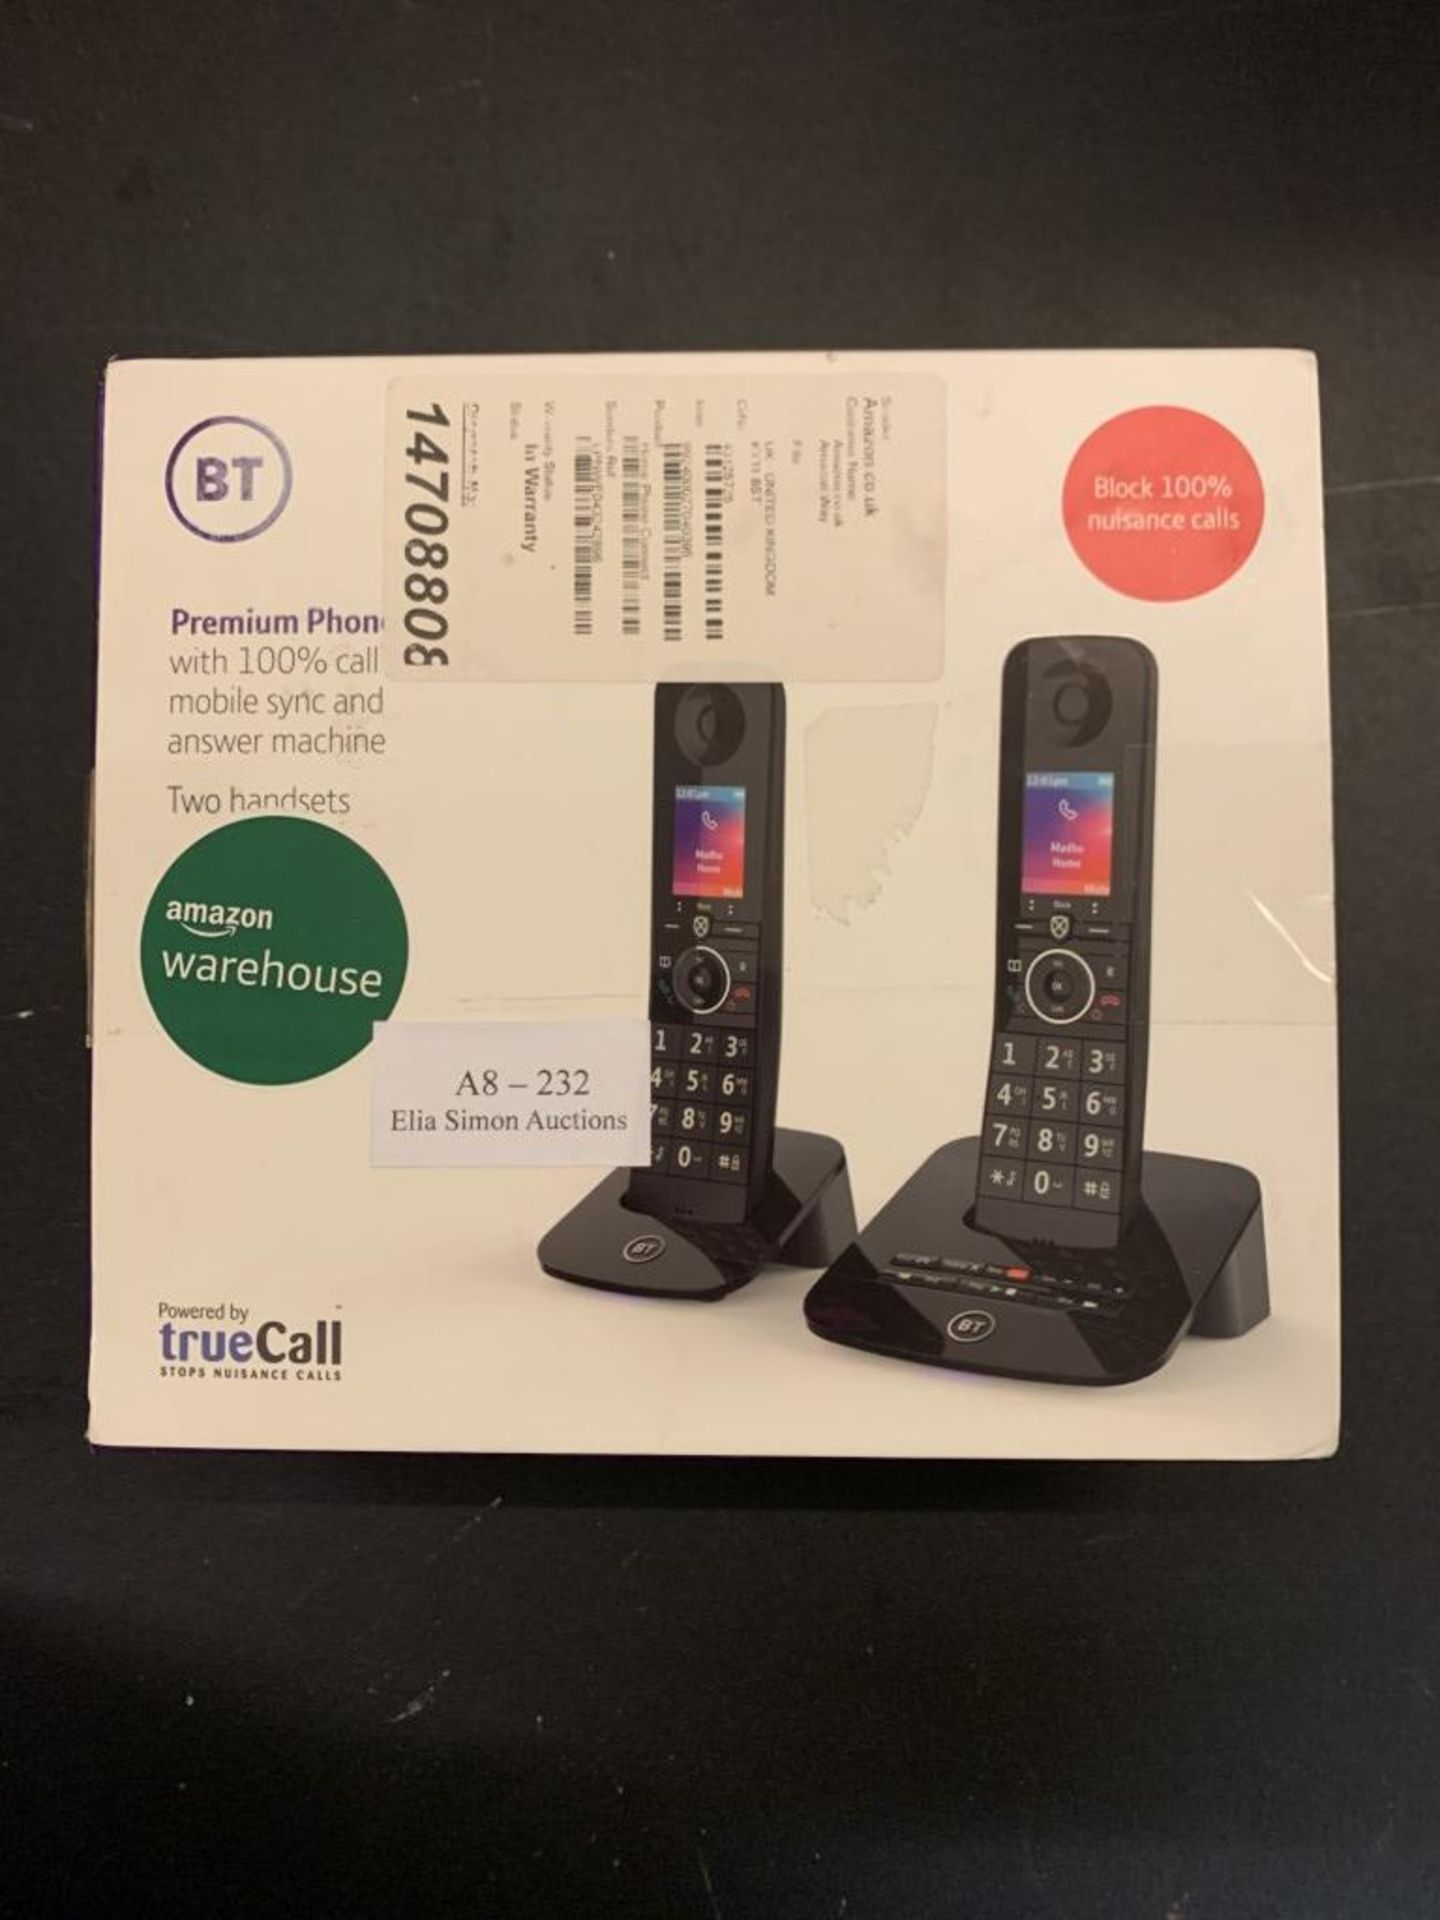 BT Premium Cordless Home Phone with 100 Percent Nuisance Call Blocking, Mobile sync and Answering Ma - Image 2 of 2